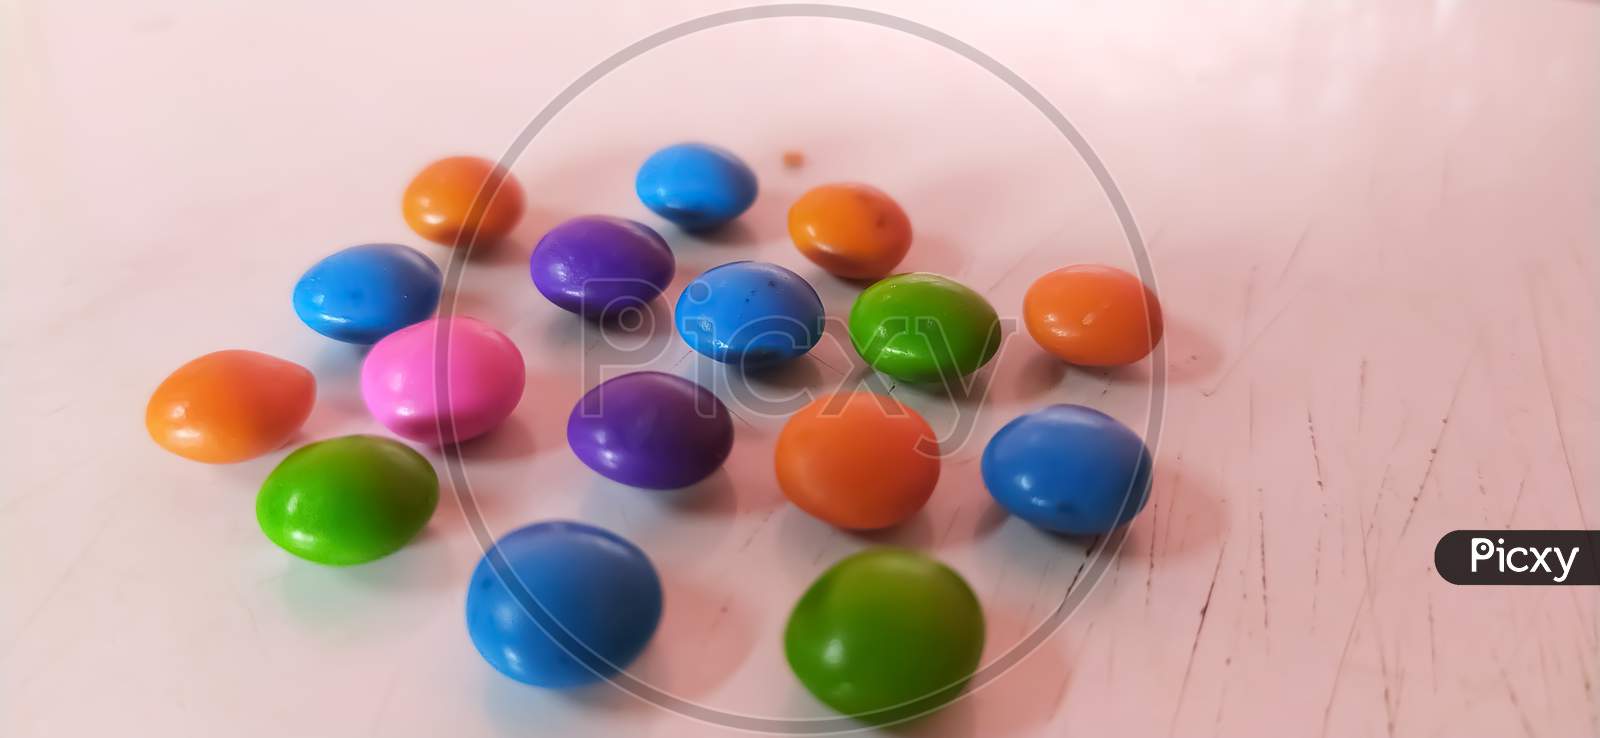 Image of Cadbury Gems Little Button of Chocolate Covered with Colorful ...